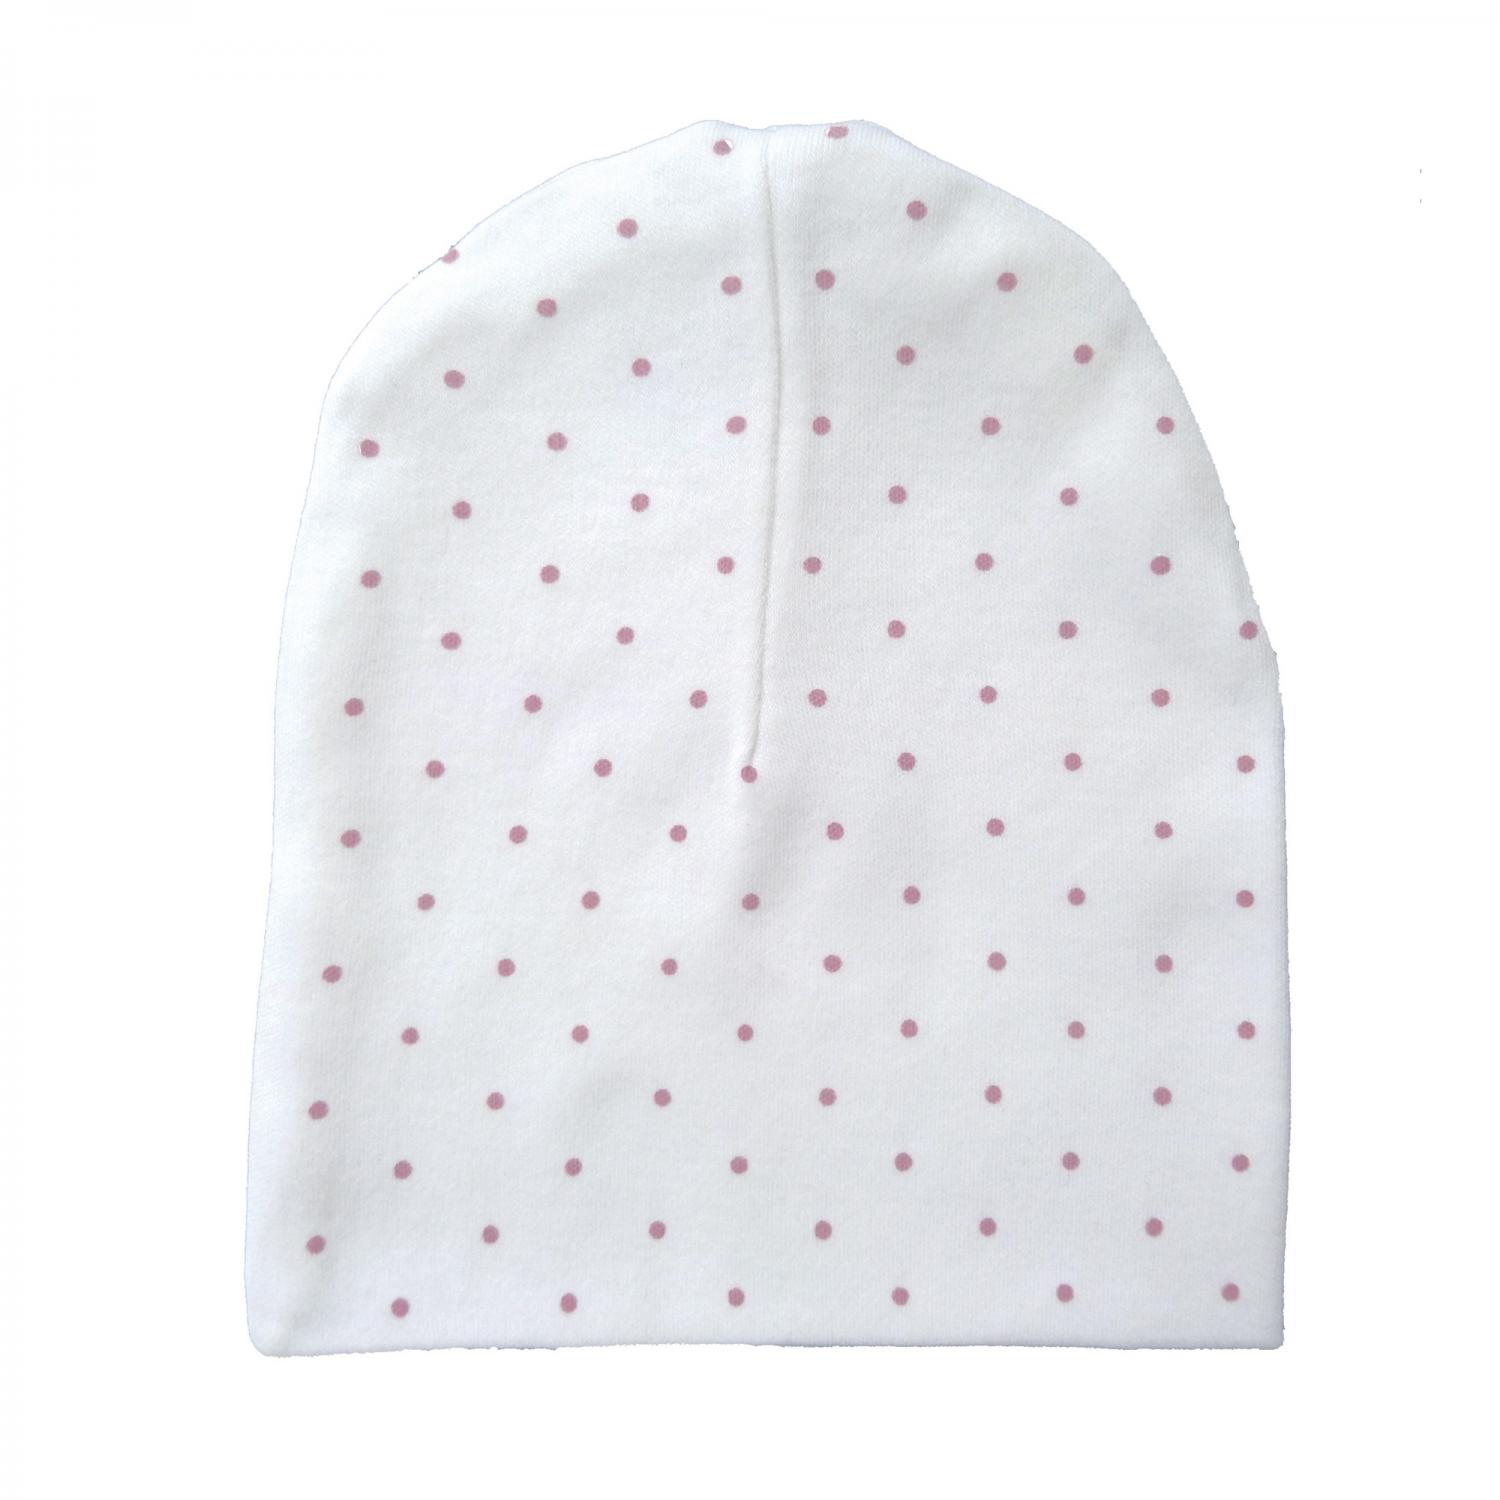 Hat white/pink dotty 0-3 months GOTS outlet